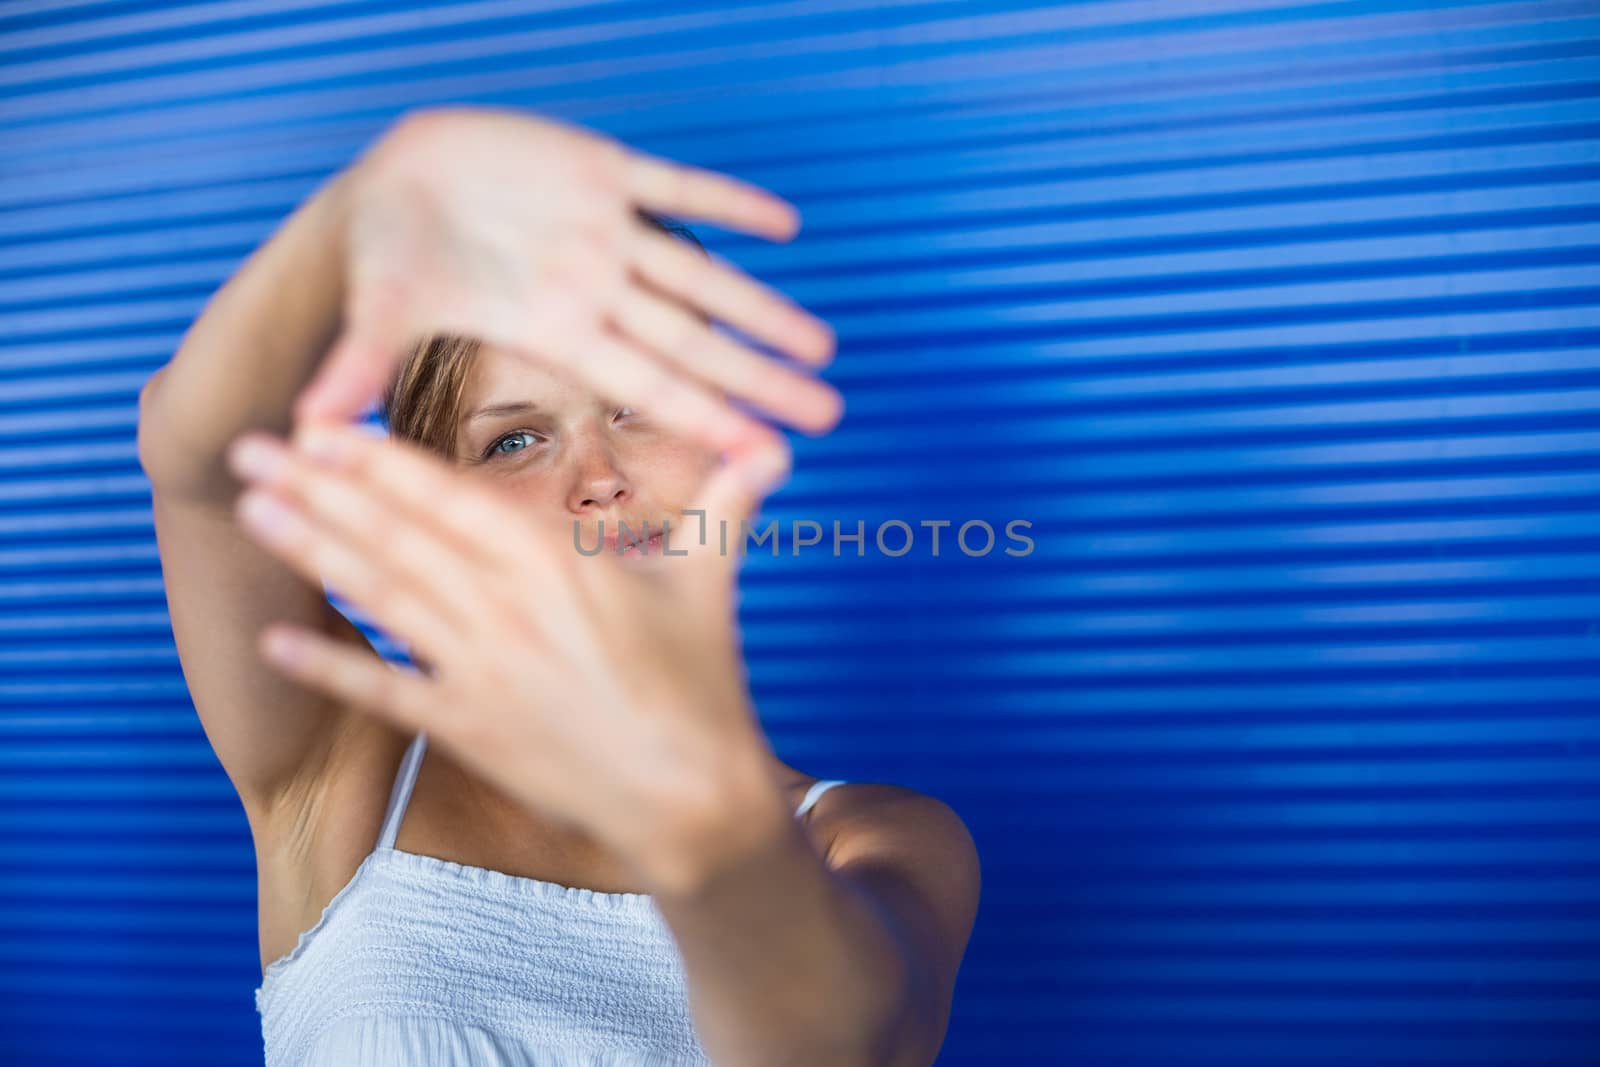 Pretty, young woman making a photo composing/shooting gesture by viktor_cap